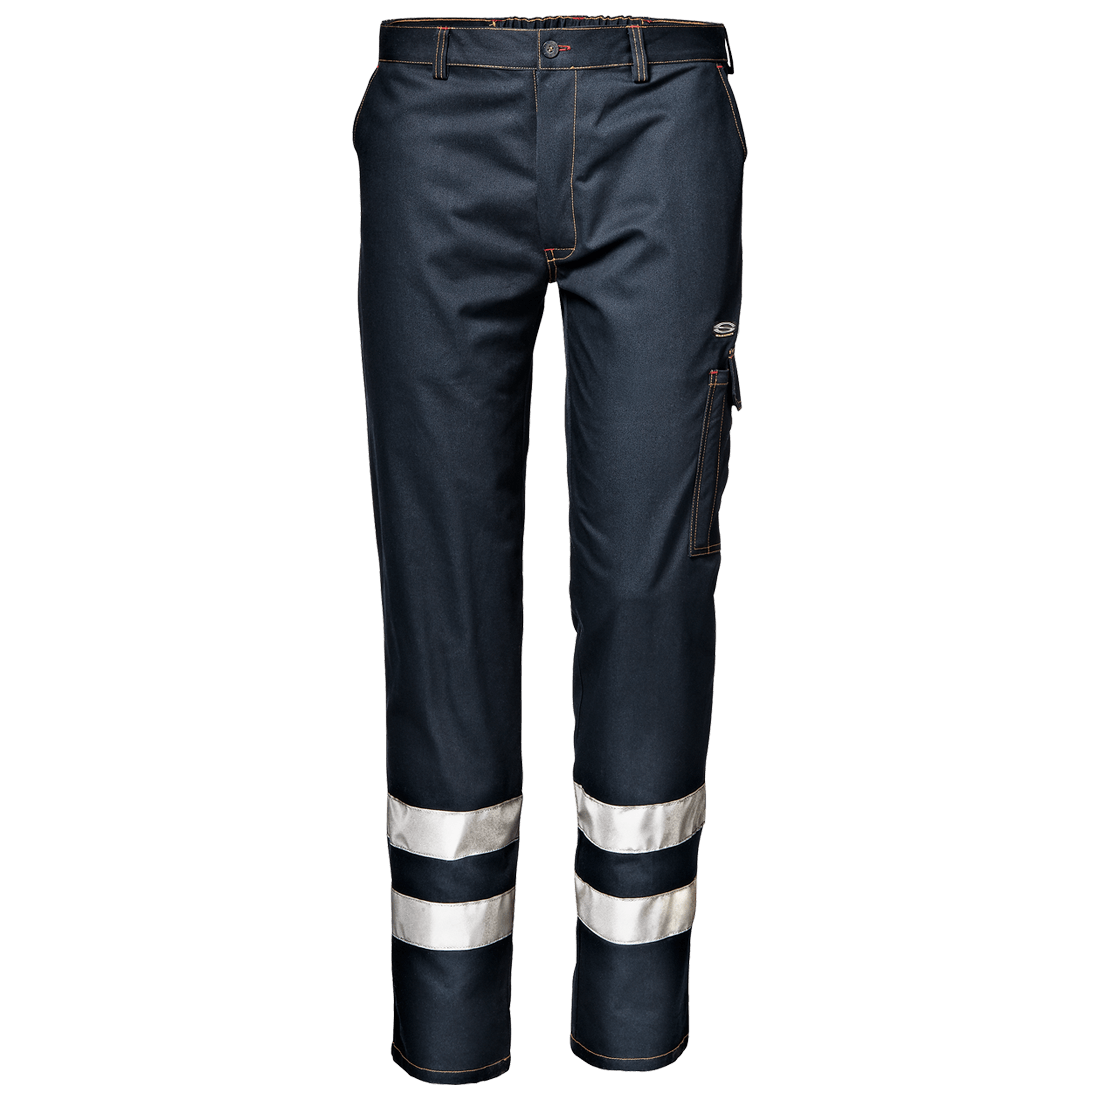 SYMBOL TROUSERS W/BANDS